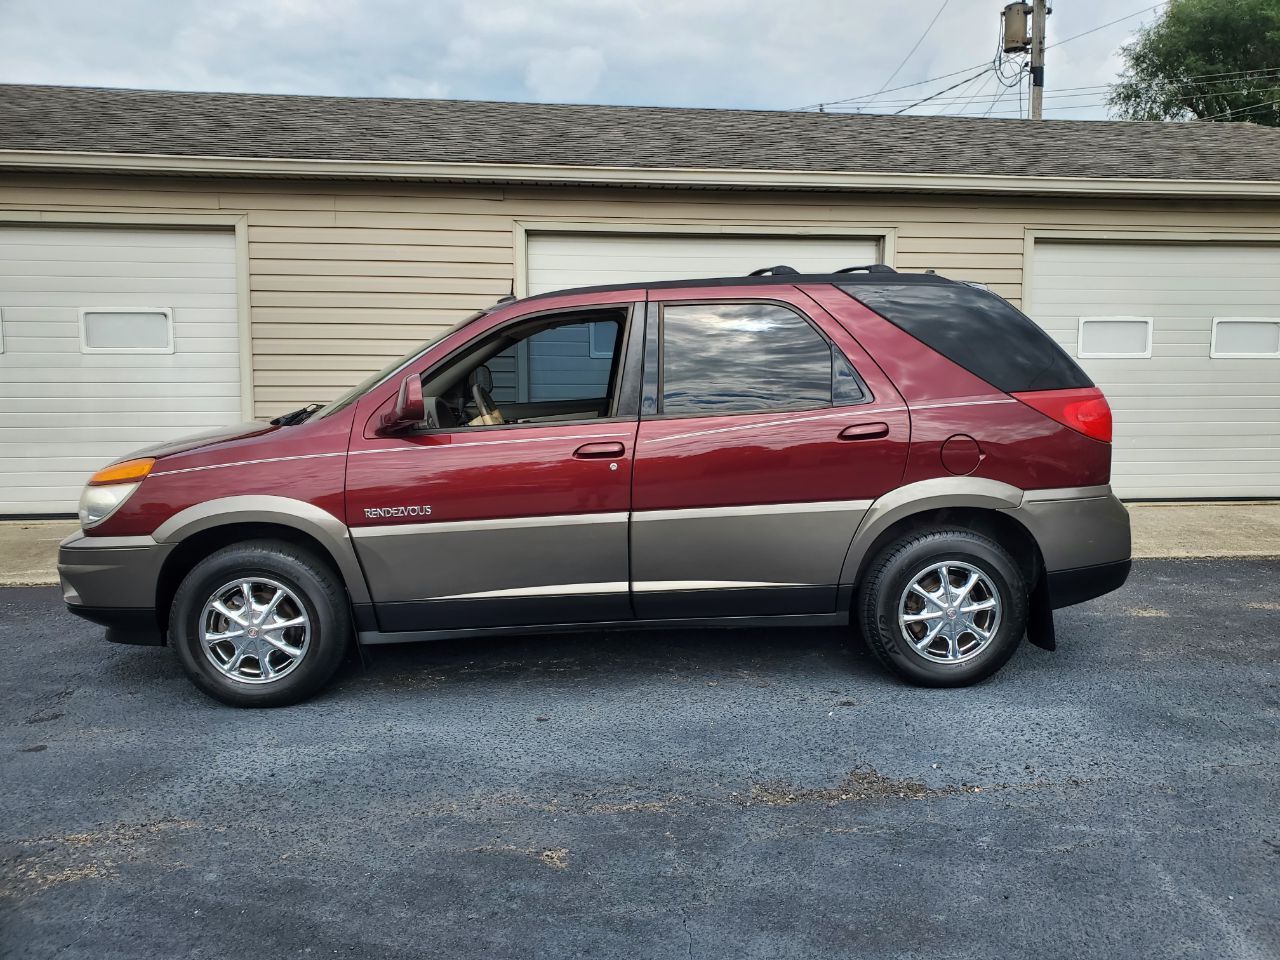 Buick Rendezvous For Sale In Indiana - Carsforsale.com®